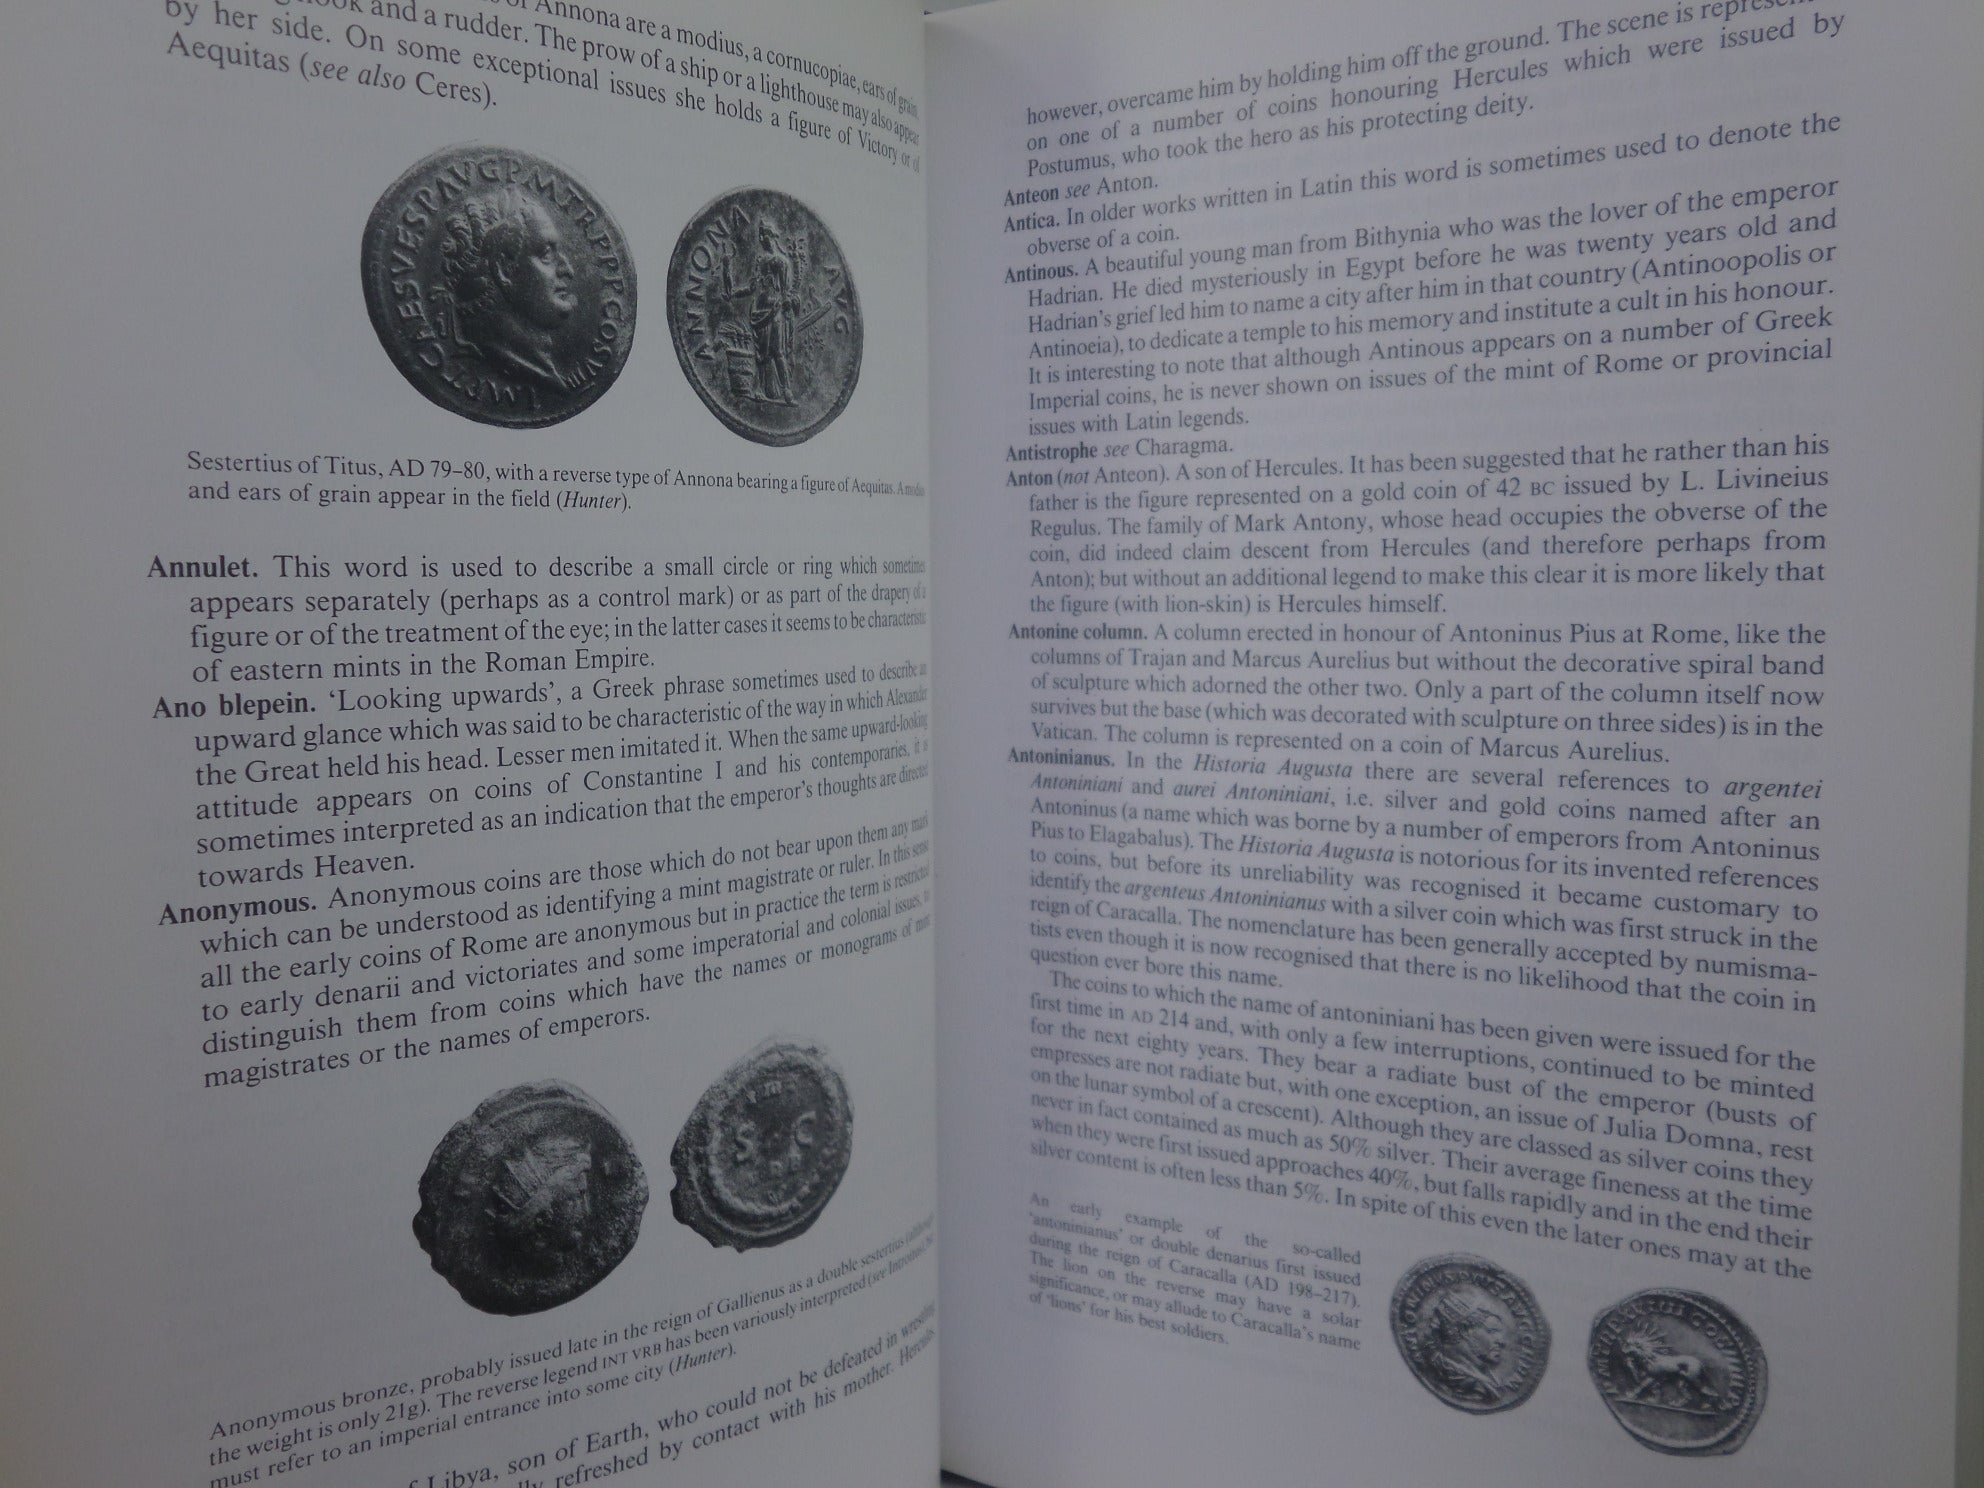 A DICTIONARY OF ANCIENT ROMAN COINS BY JOHN MELVILLE JONES 2010 HARDCOVER